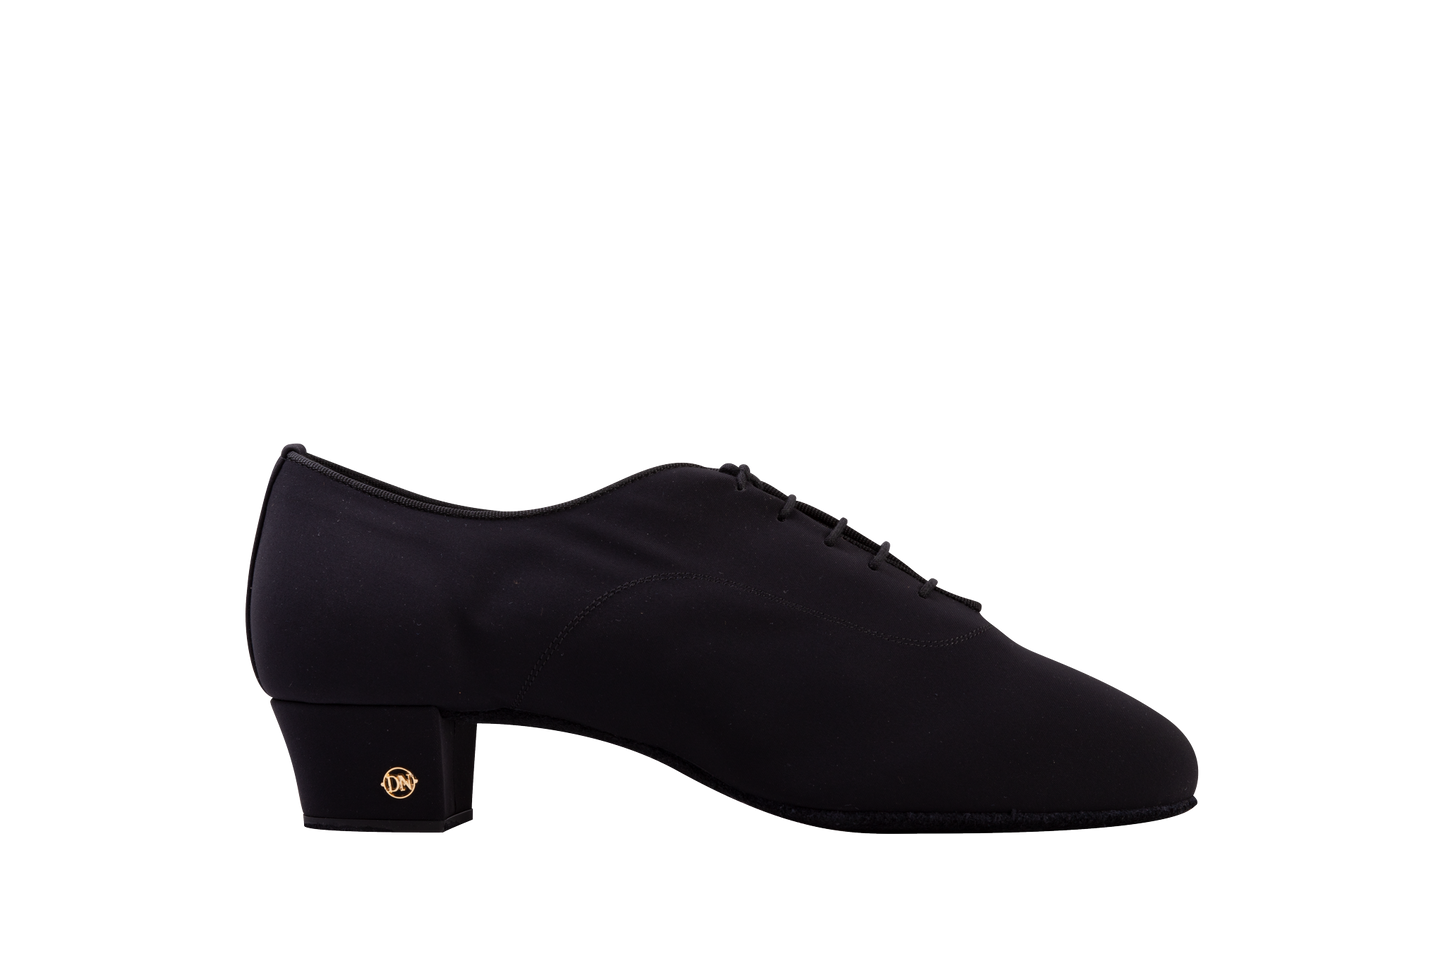 Dance Naturals 116 Torcello Men's Latin Dance Shoe Available in Black Leather or Black Fabric